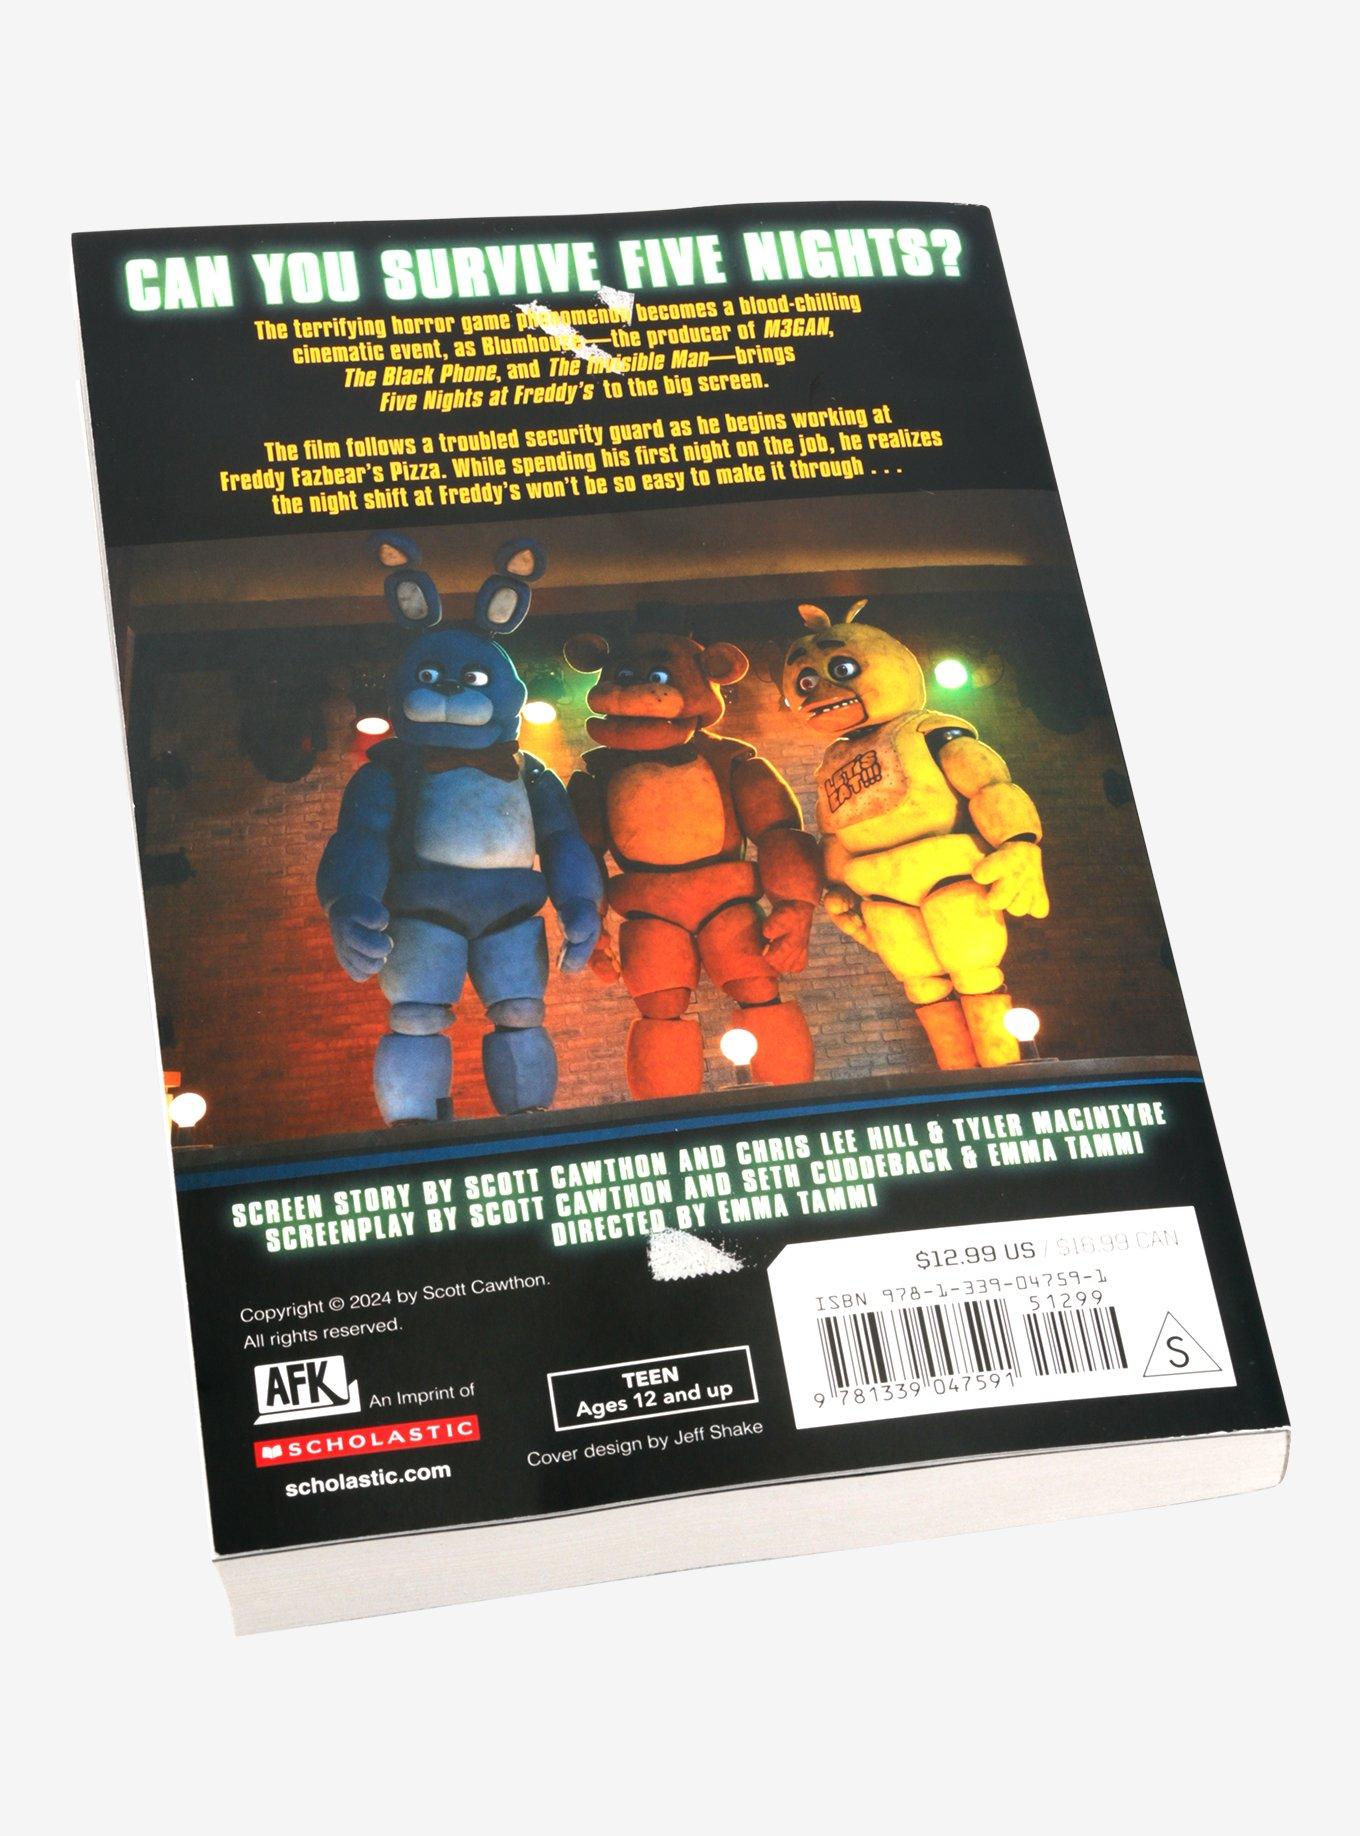 Five Nights At Freddy's: The Official Movie Novel